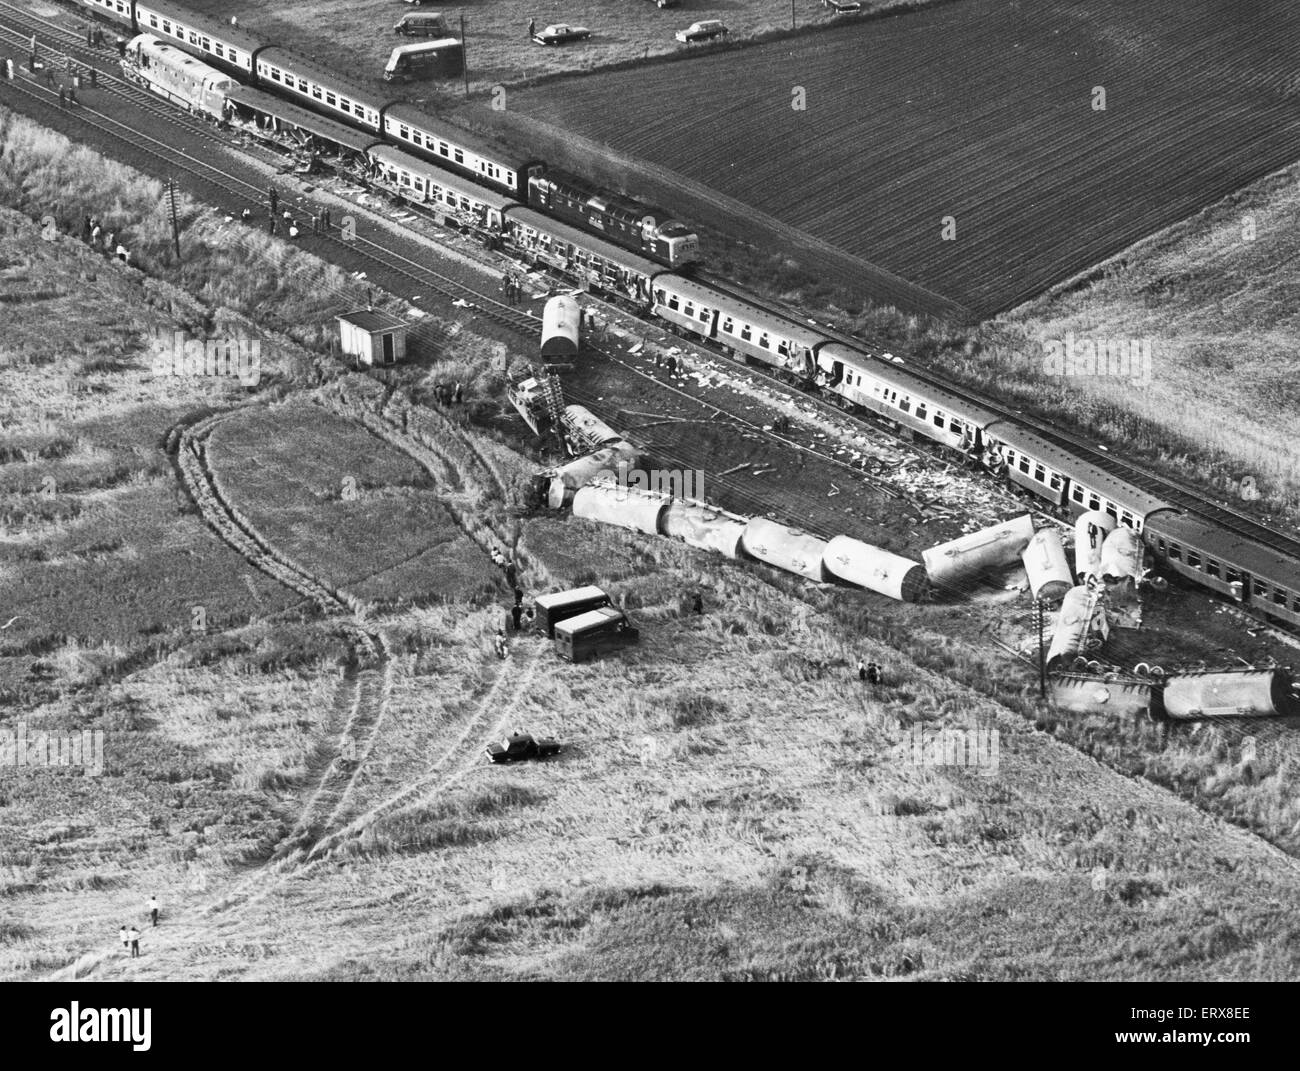 Topcliffe, Thirsk train crash. Aerial view of the 12.00 express train from King's Cross to Edinburgh which collided at speed with the wreckage of a derailed freight train around 15:17 on that day. Seven people were killed and 45 injured, 15 seriously.  31st July 1967 Stock Photo